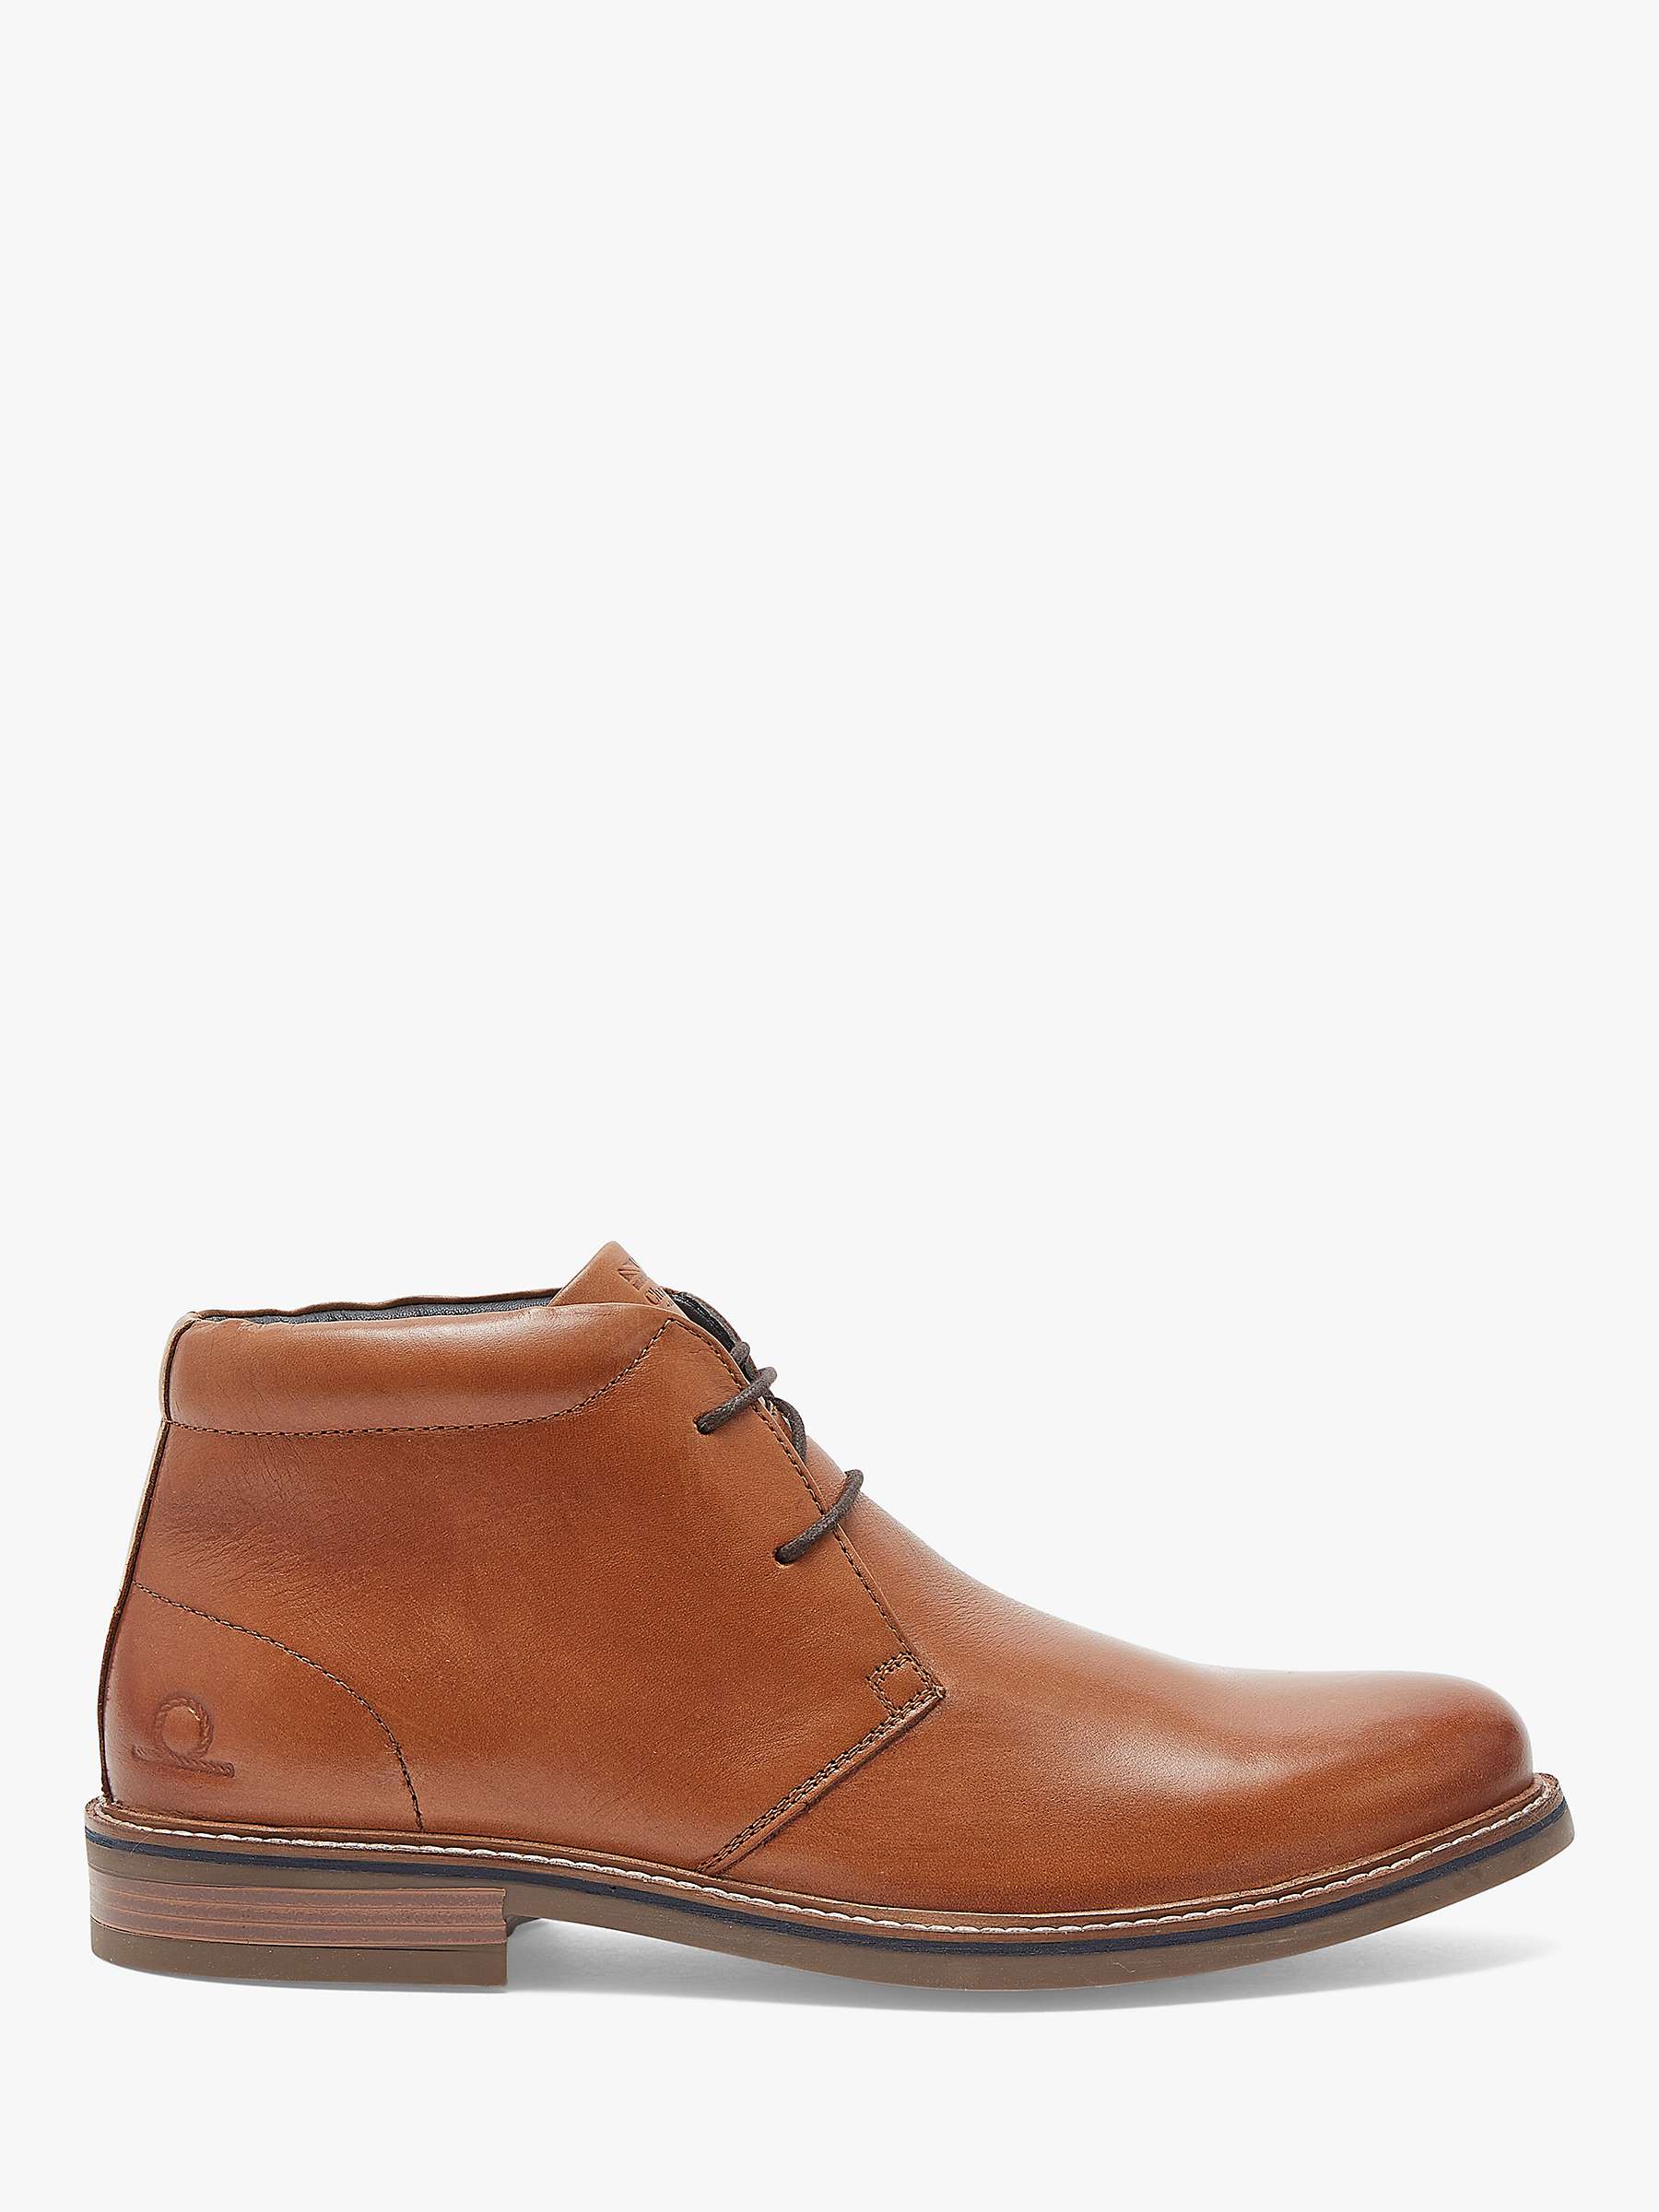 Buy Chatham Buckland Leather Chukka Boots Online at johnlewis.com